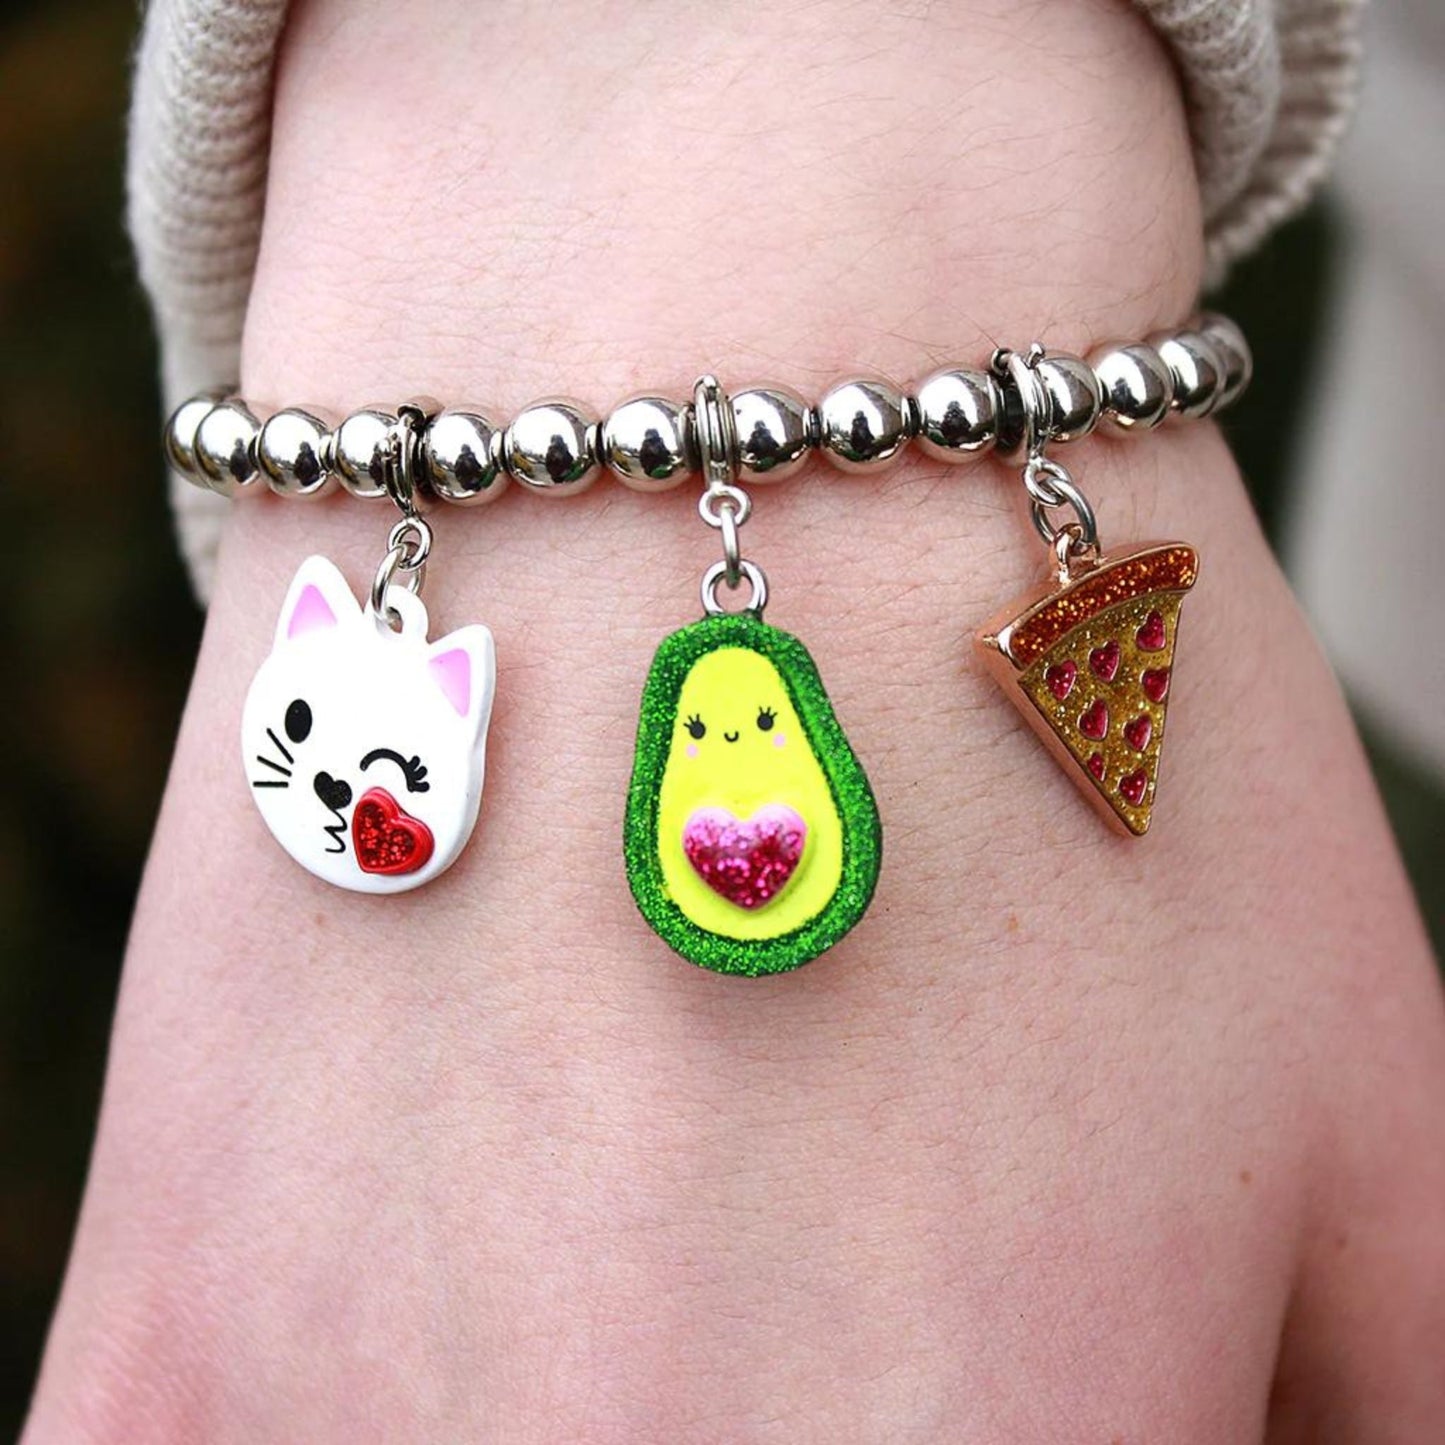 Charm it! Glitter Avocado Charm - a Spirit Animal - Charms accessories active September 2023 Charm it!